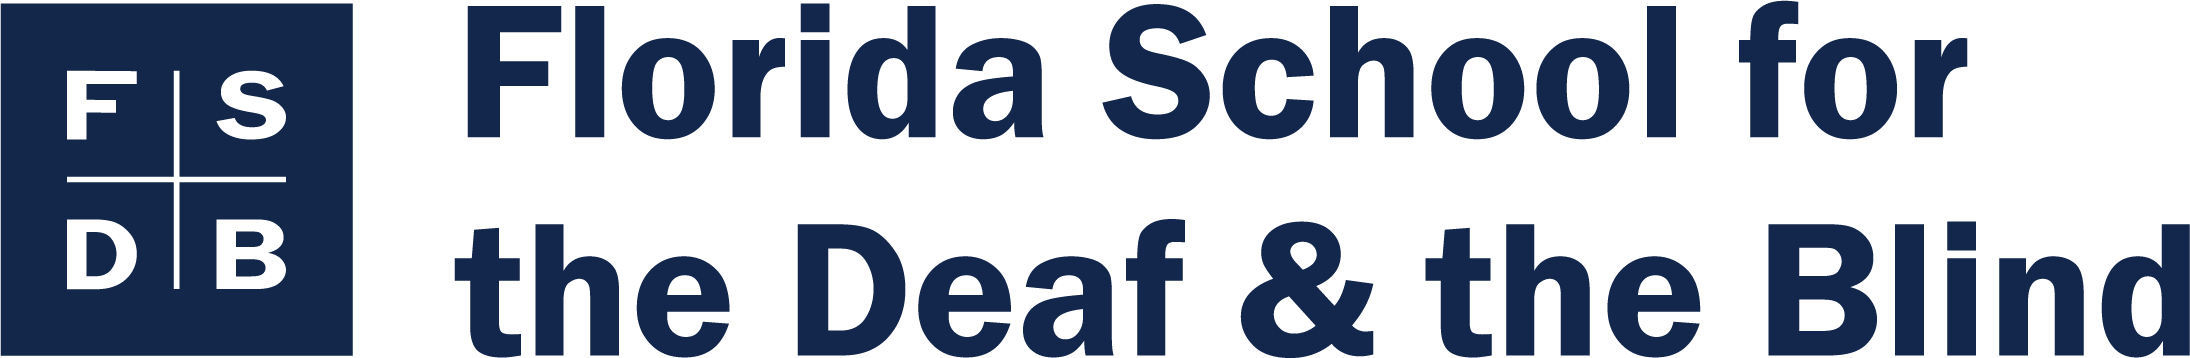 florida school for the deaf and blind logo